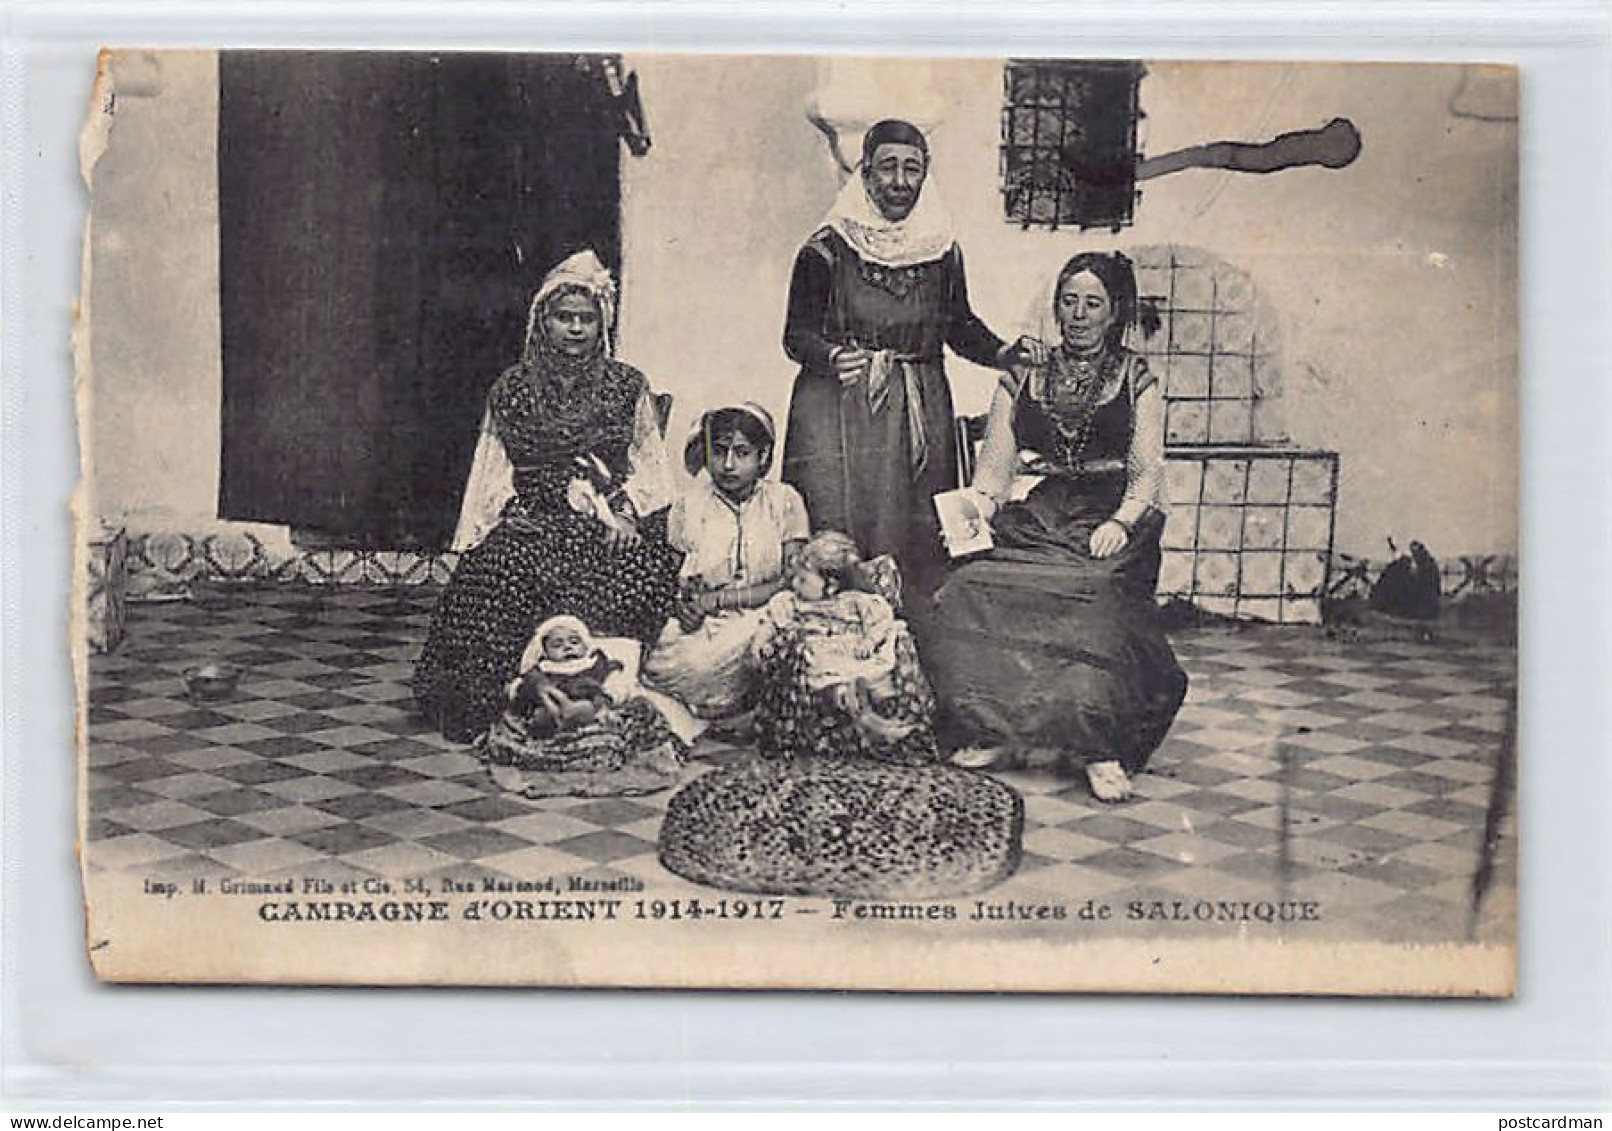 JUDAICA - Greece - SALONICA - Jewish Family - SEE SCANS FOR CONDITION - Publ. H. Grimaud  - Judaika